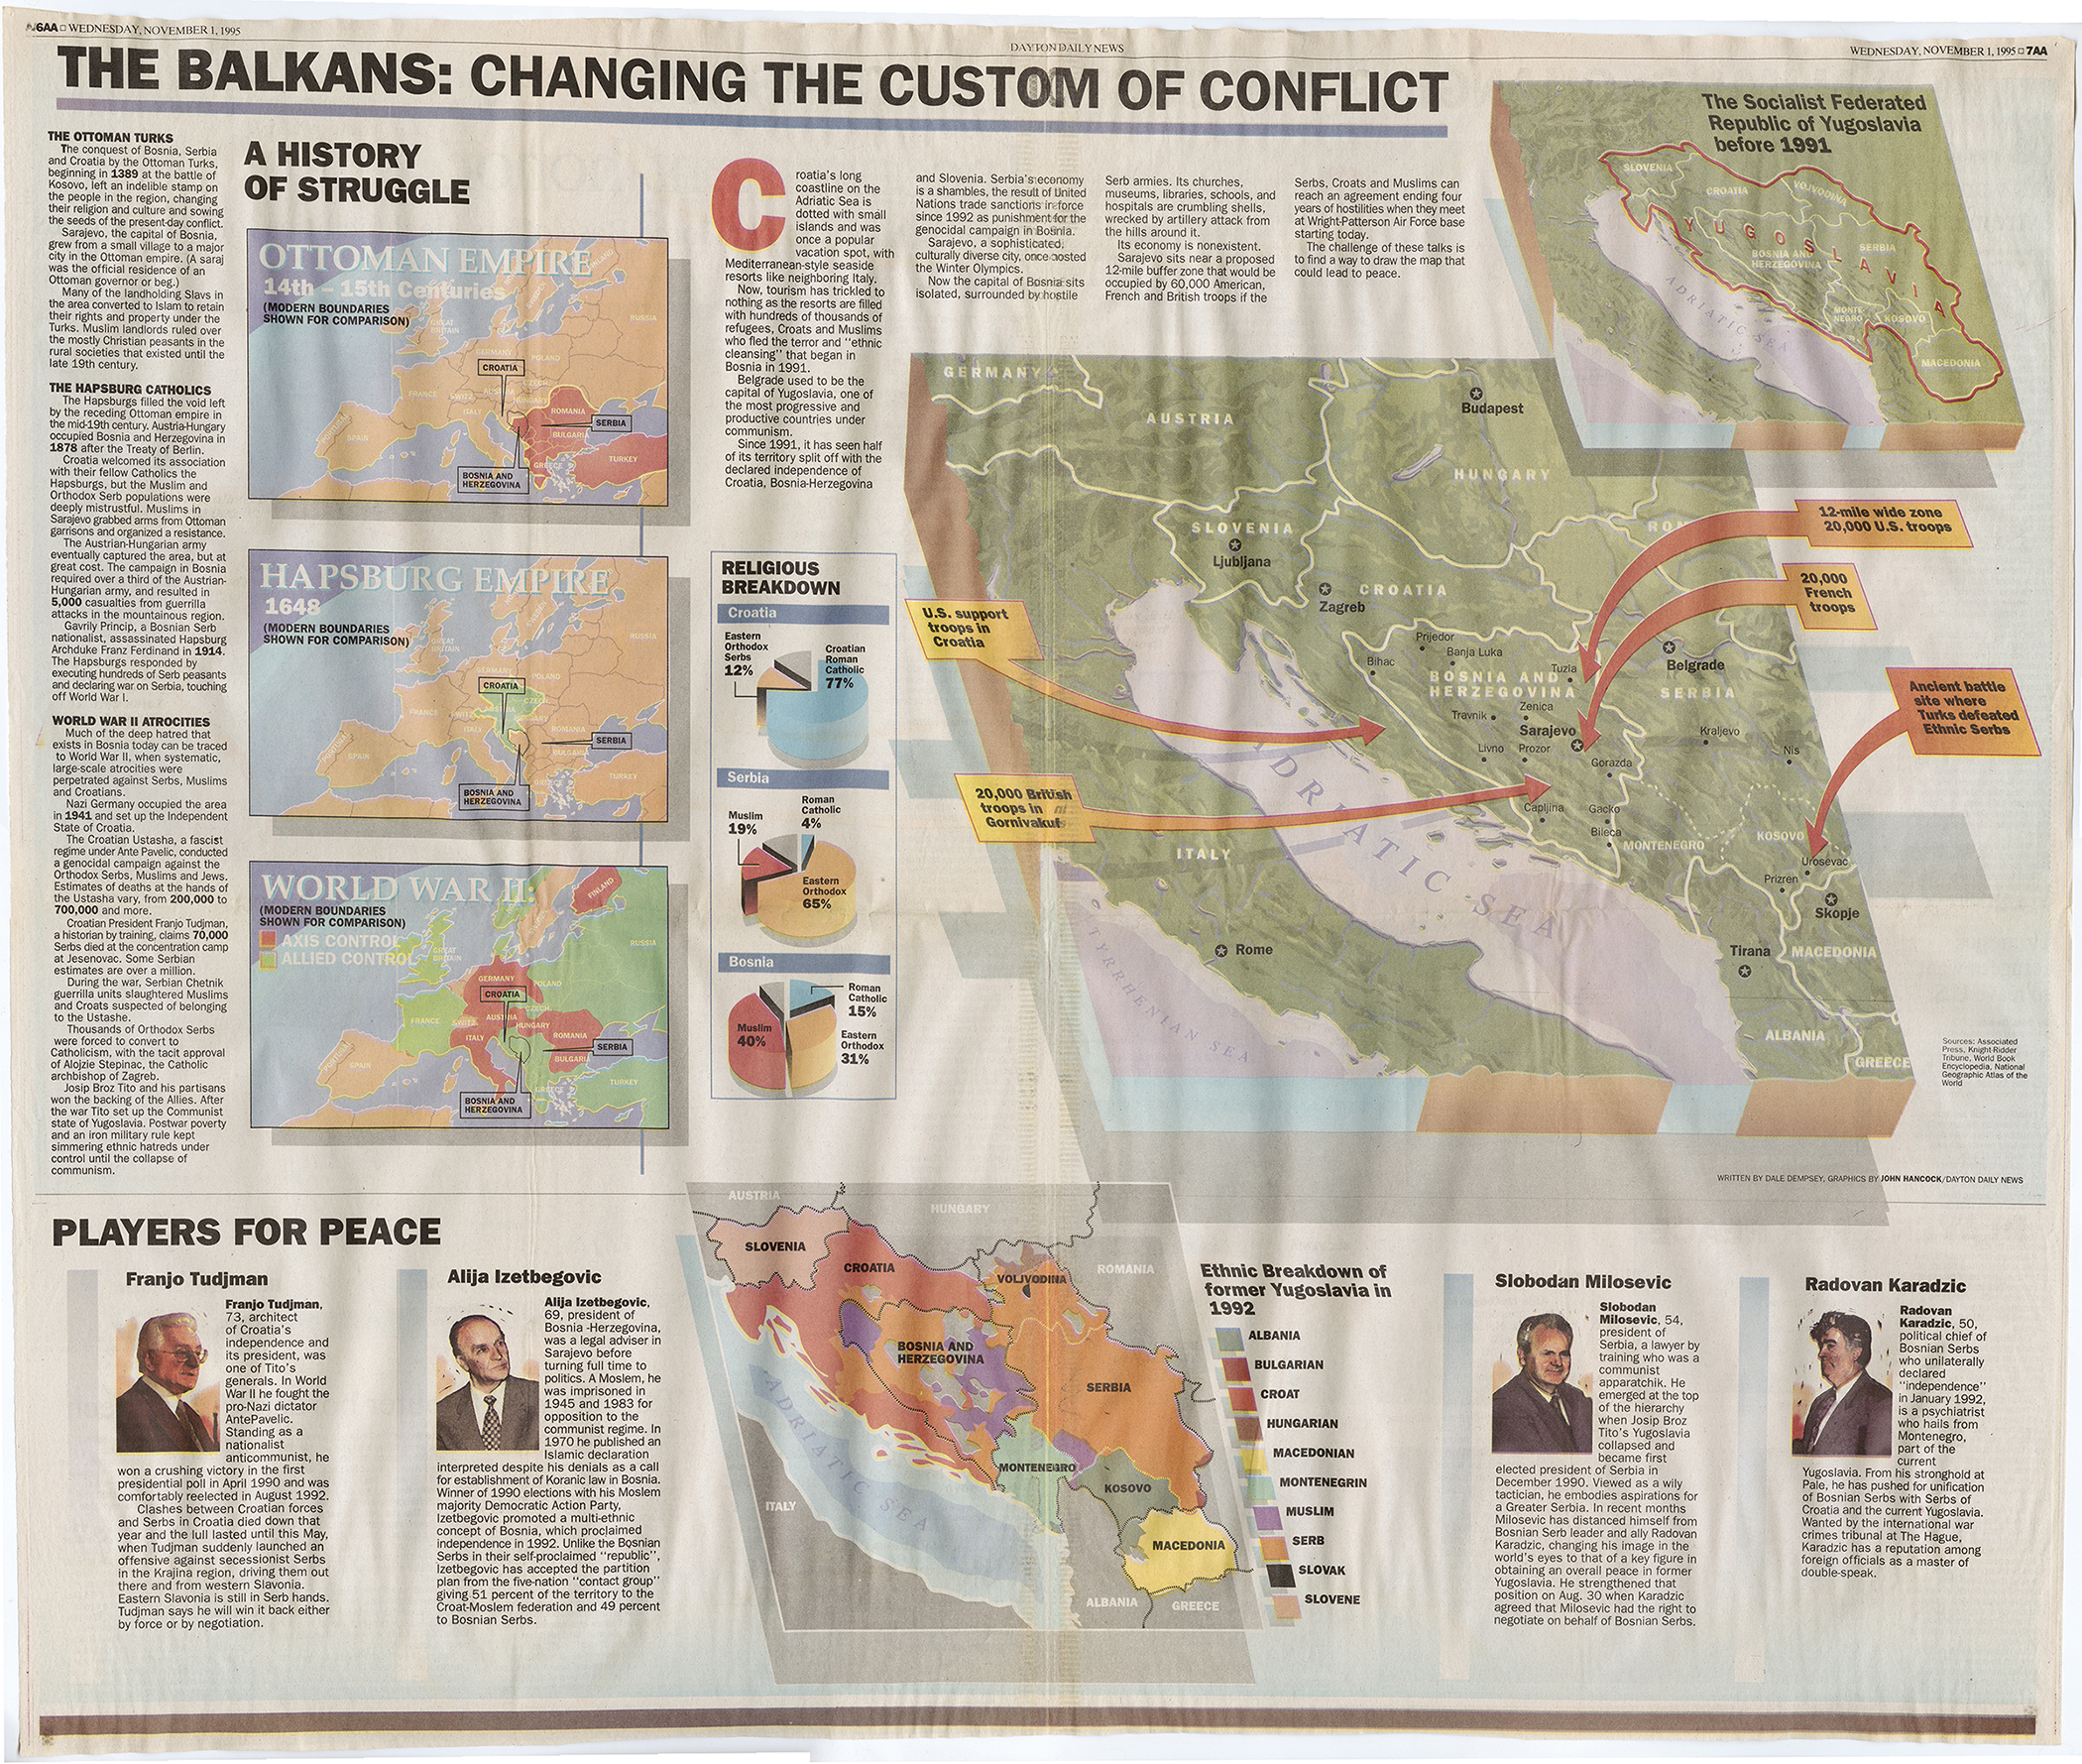 "The Balkans: Changing the Custom of Conflict," Dayton Daily News, November 1, 1995, page 6AA, from MS-411